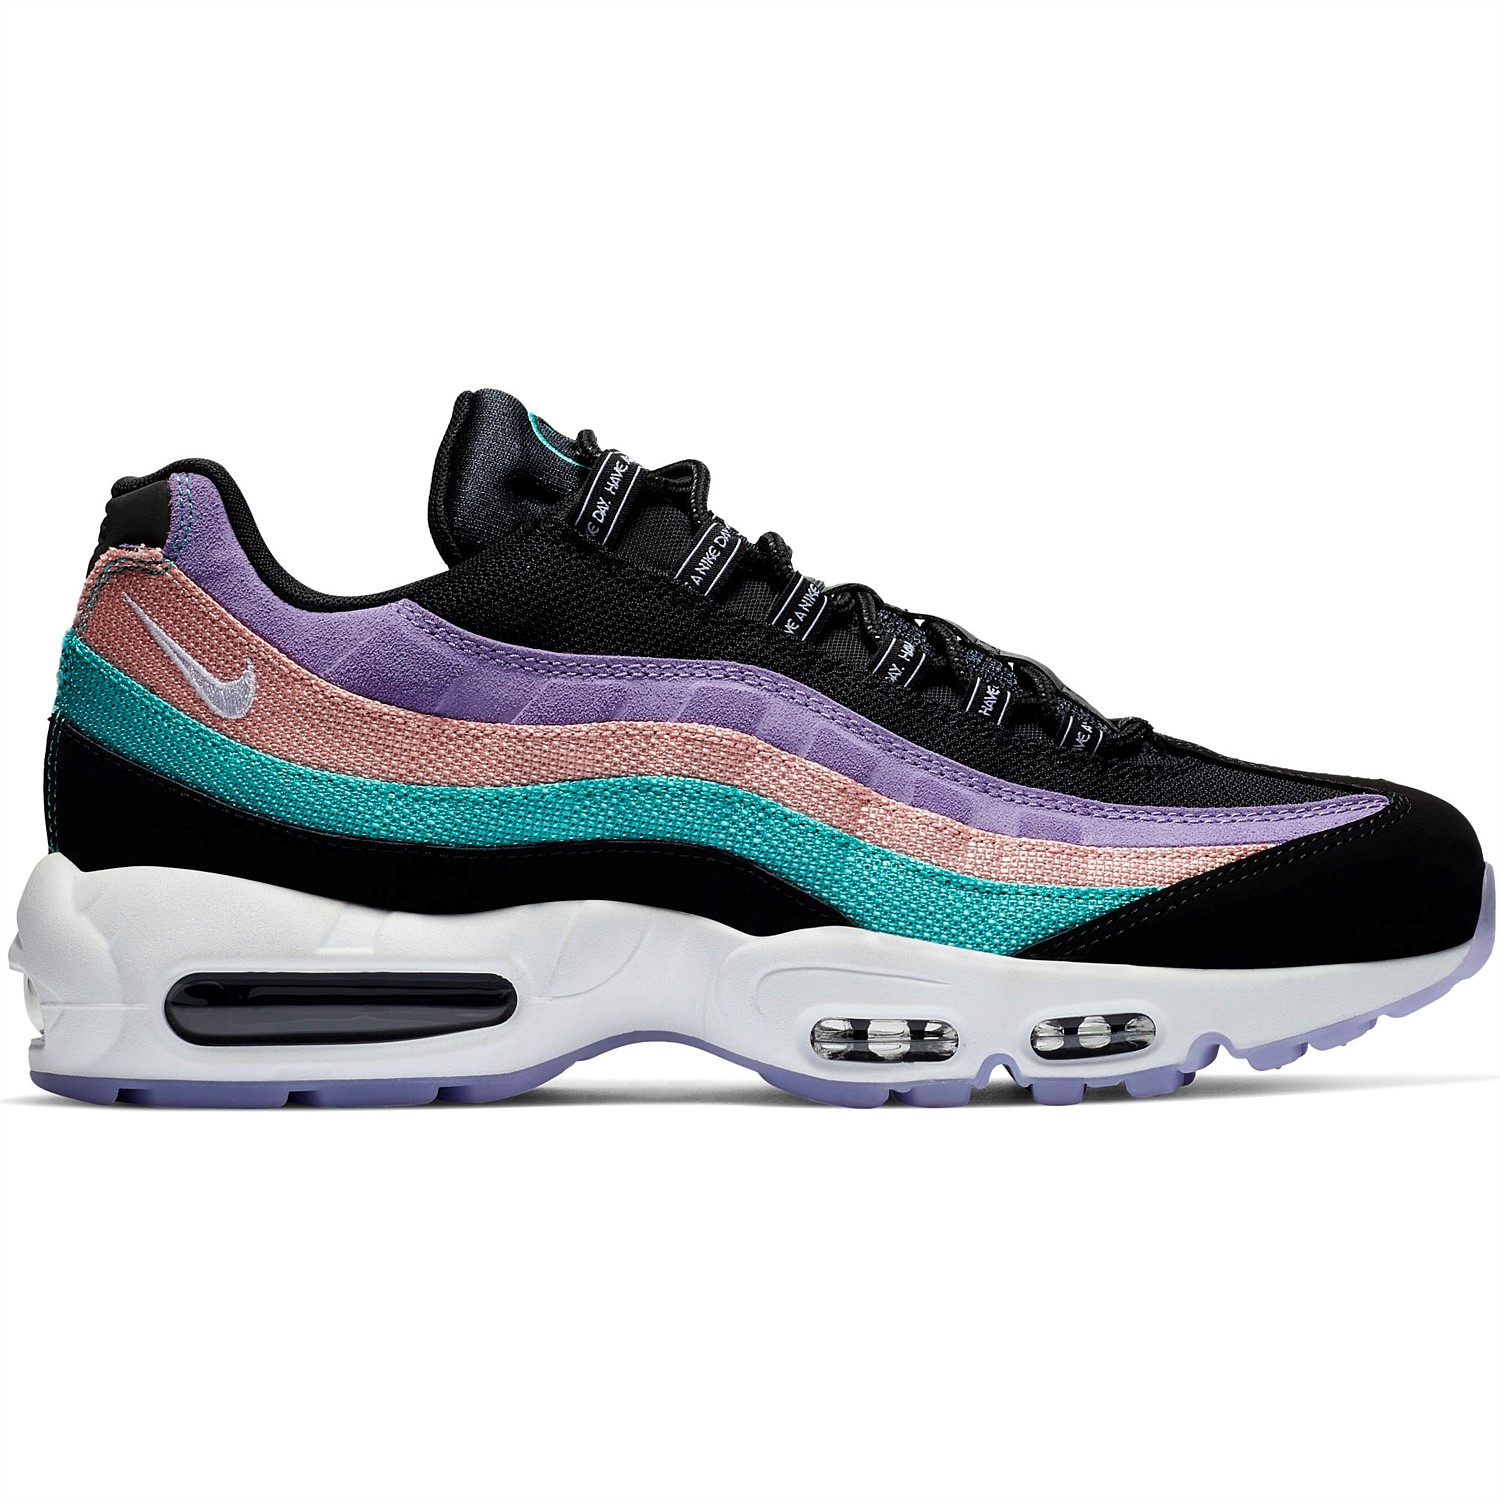 Stirling Sports - Air Max 95 ND Mens